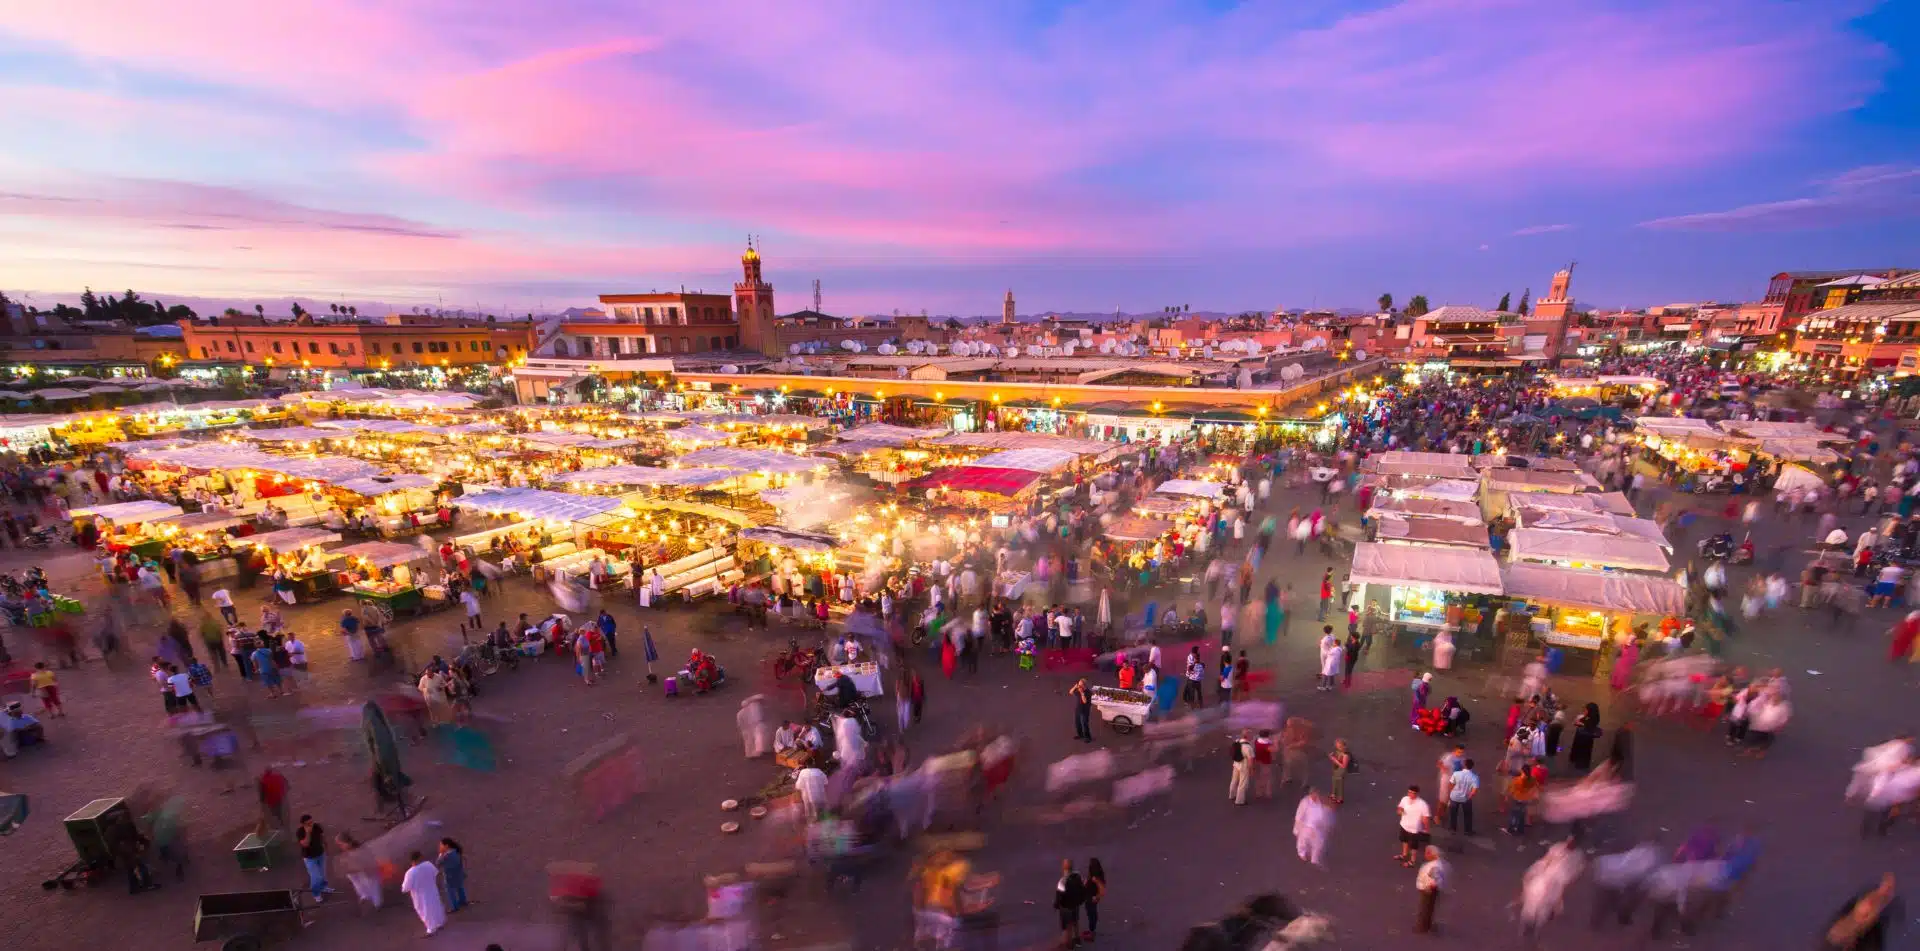 Experience the bustling medina of Marrakech